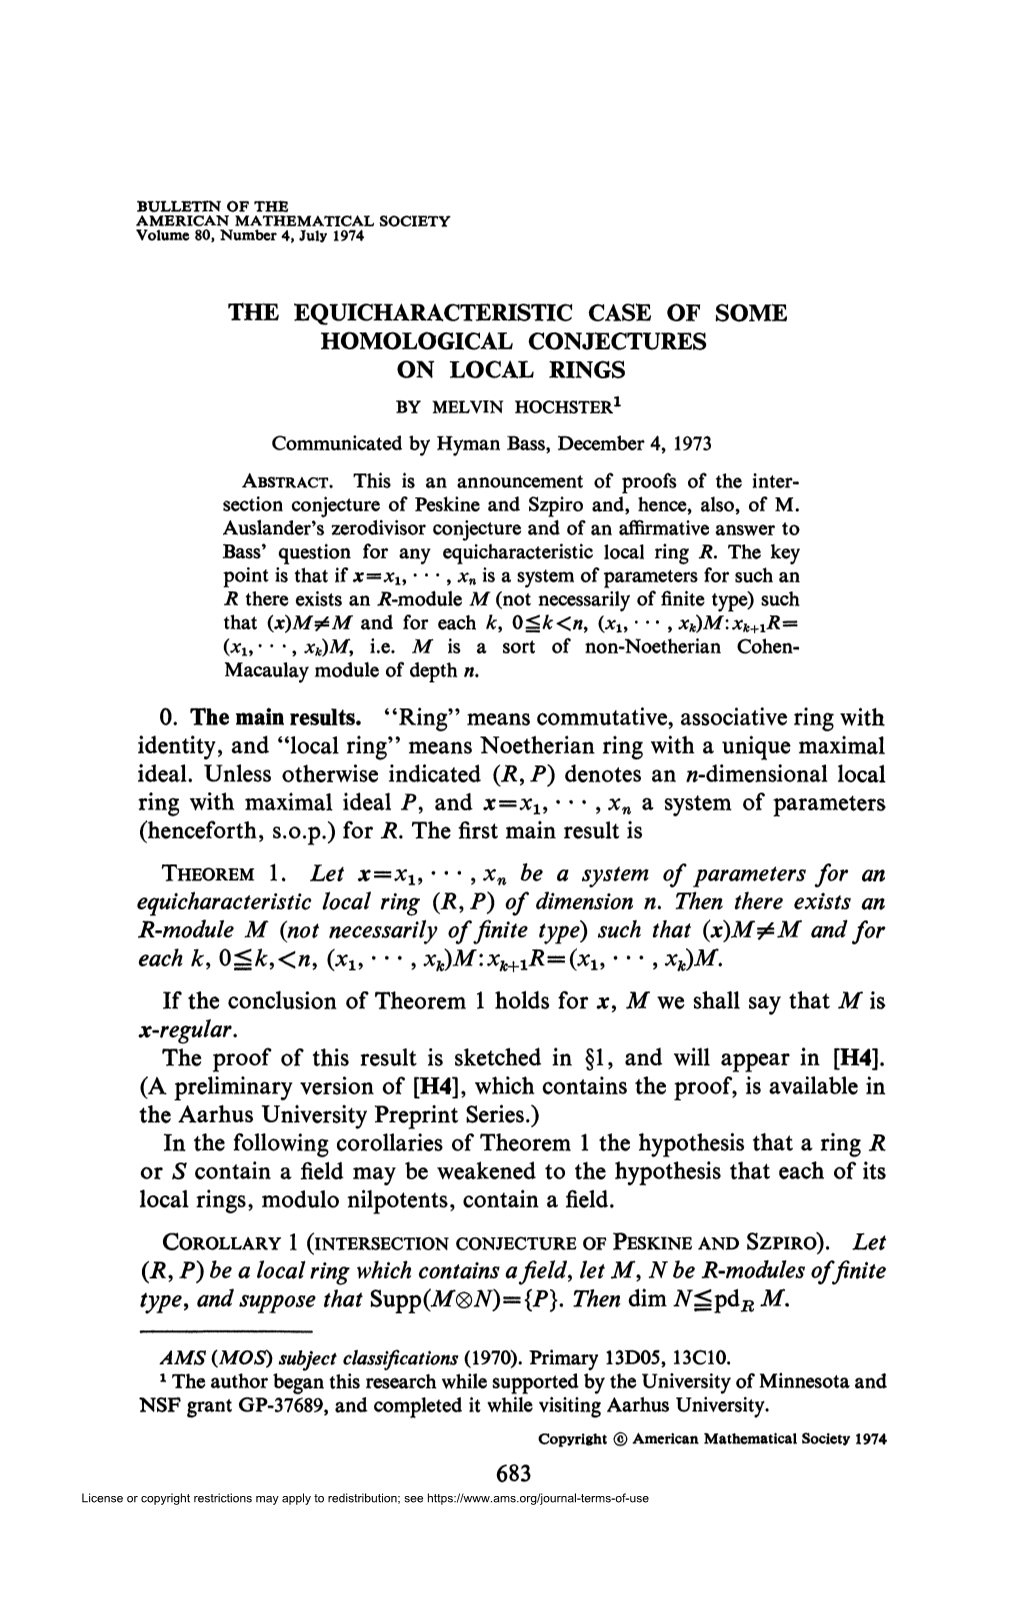 THE EQUICHARACTERISTIC CASE of SOME HOMOLOGICAL CONJECTURES on LOCAL RINGS by MELVIN HOCHSTER1 Communicated by Hyman Bass, December 4, 1973 ABSTRACT